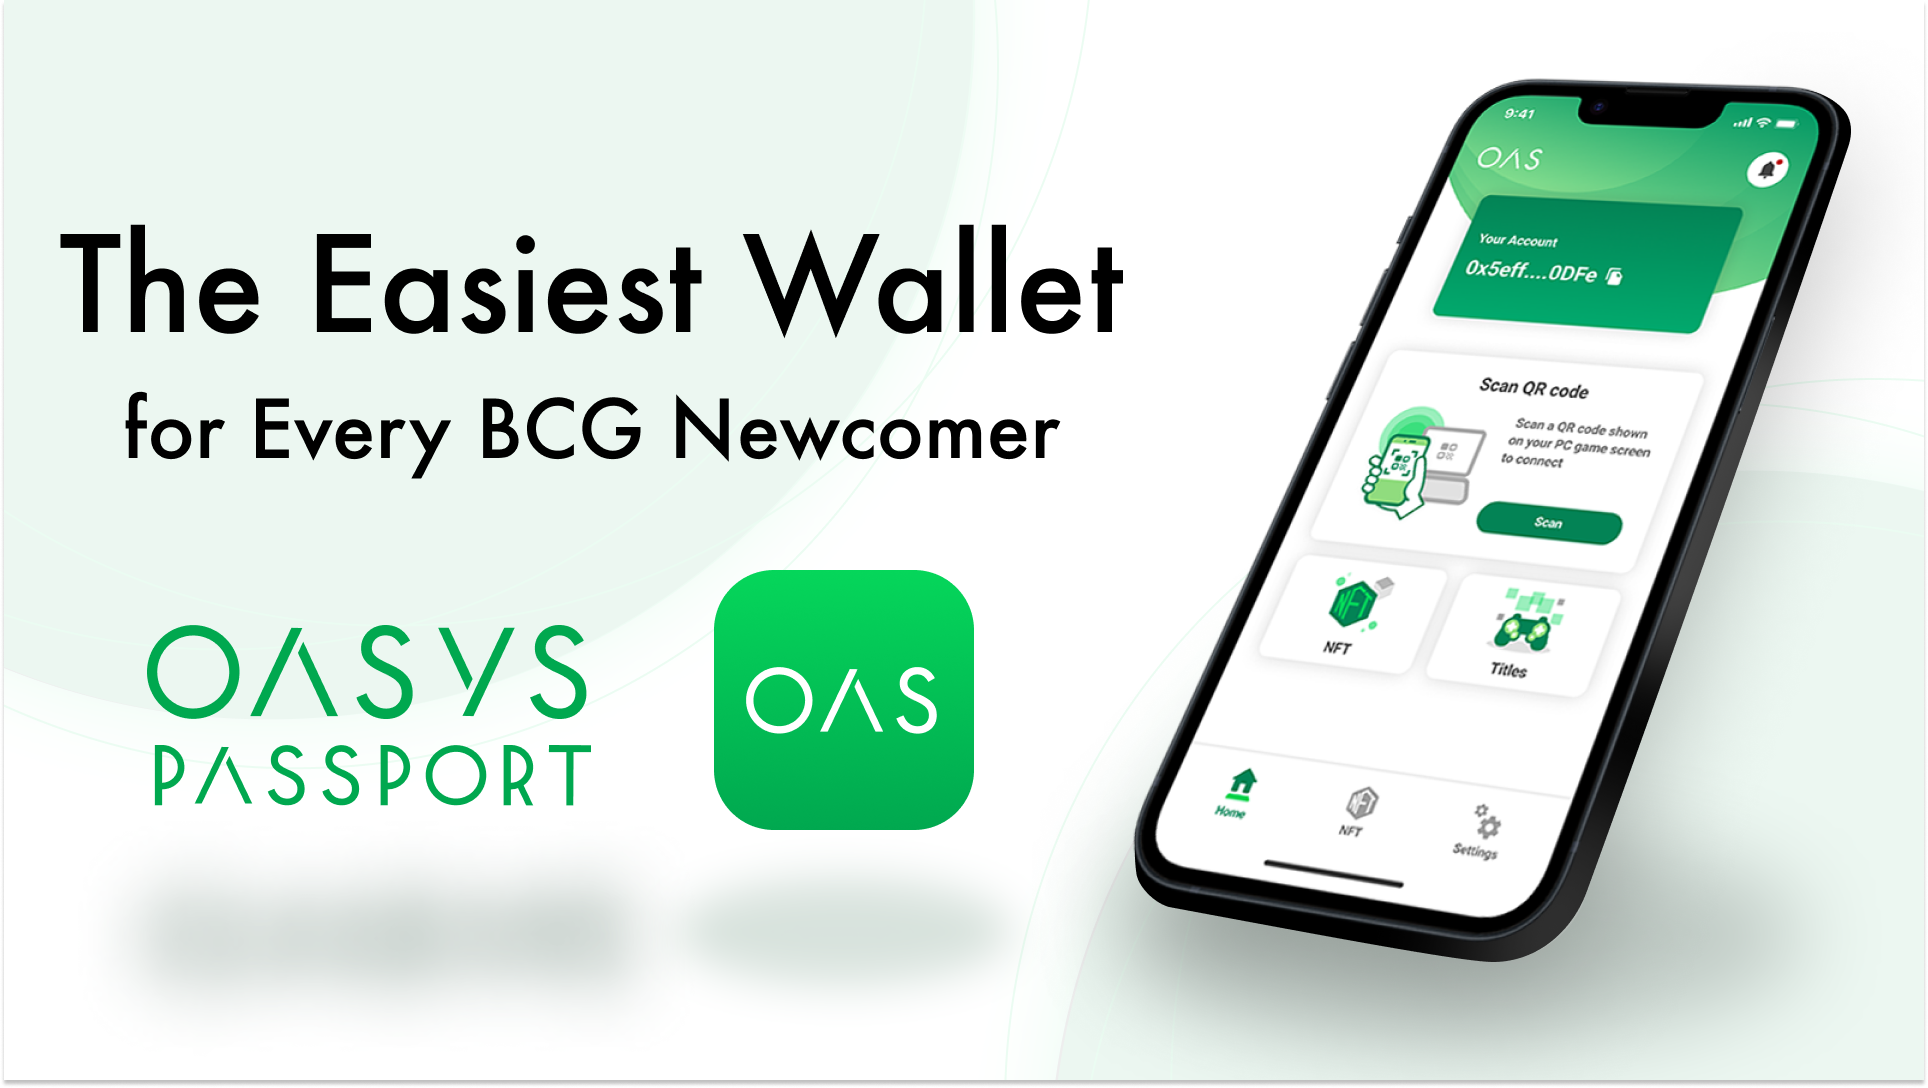 double jump.tokyo Launches Alpha Version of Oasys Passport a New Innovative Specialized Wallet 11